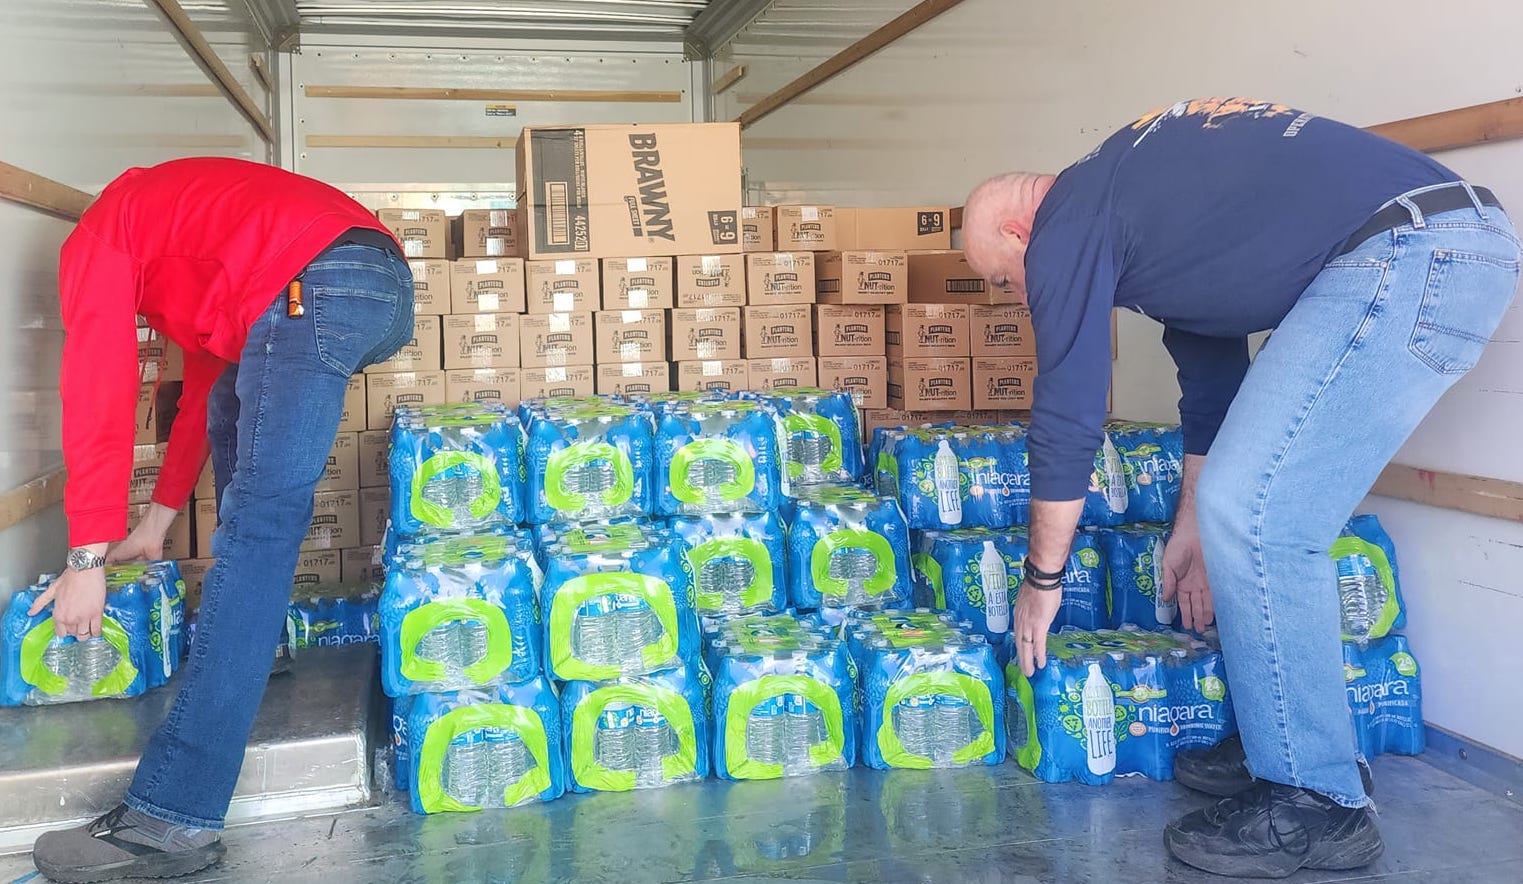 Volunteers unload a truck with water for residents of New Palestine, OH on Feb 18, 2023